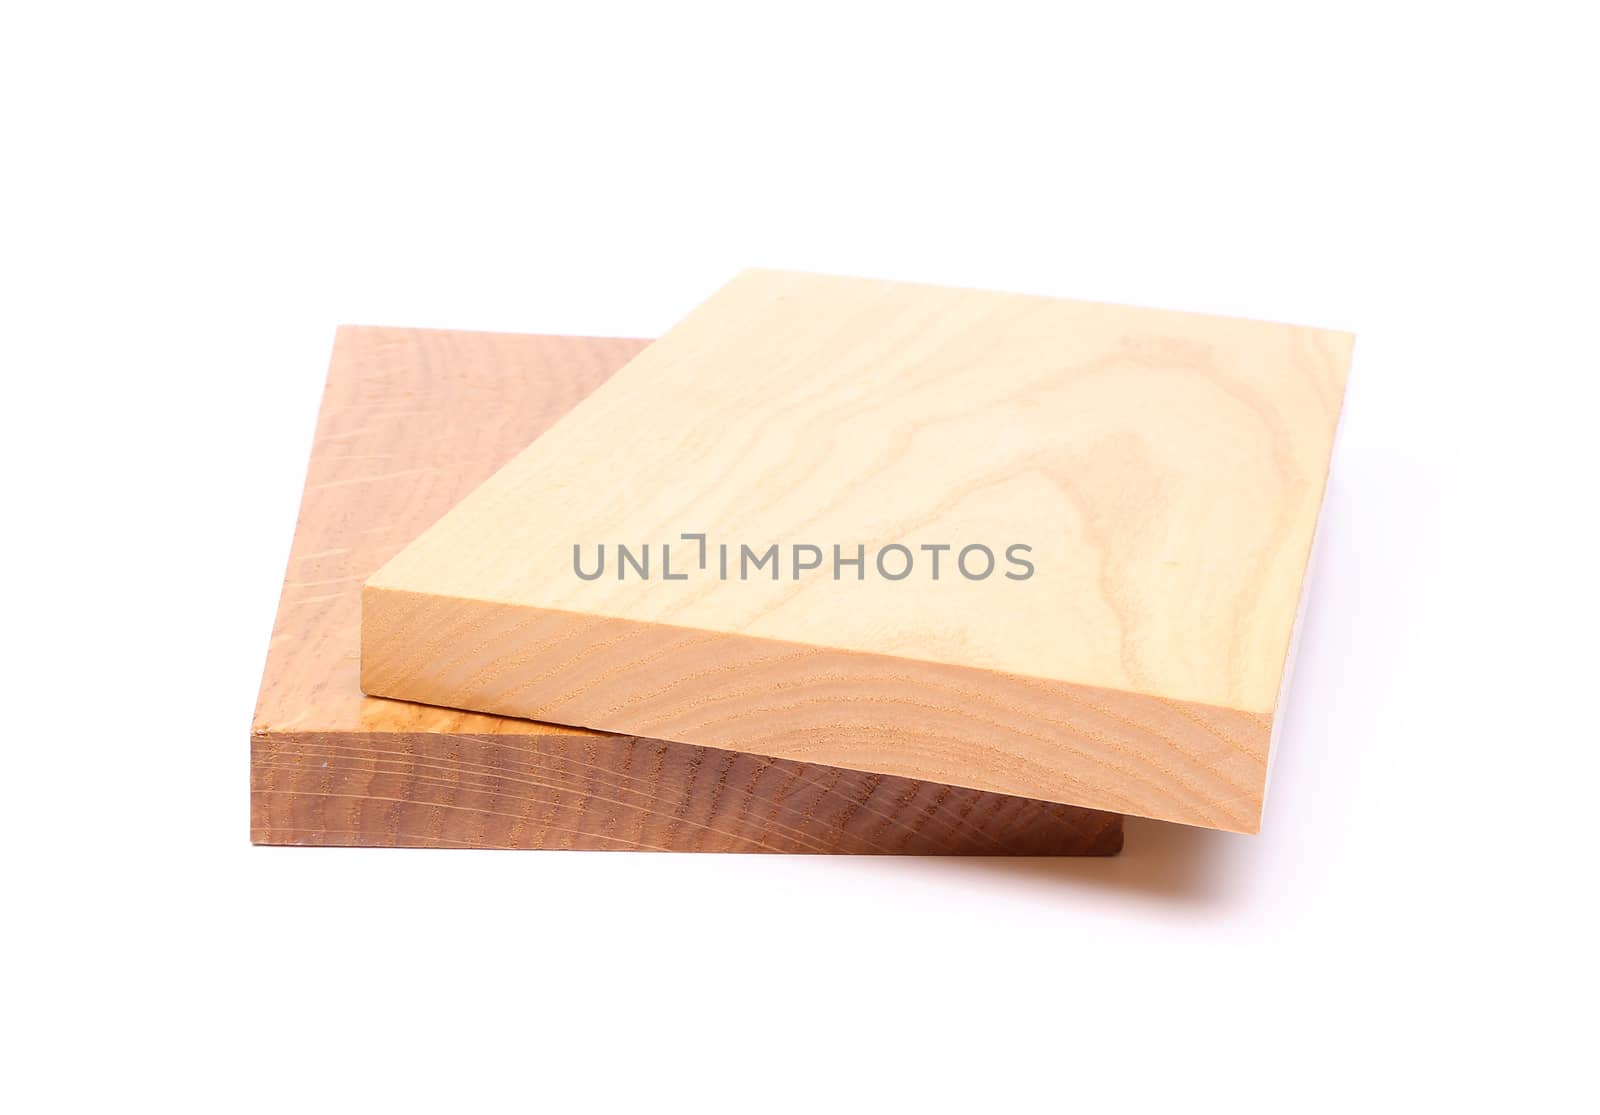 Two wooden plank close-up by indigolotos